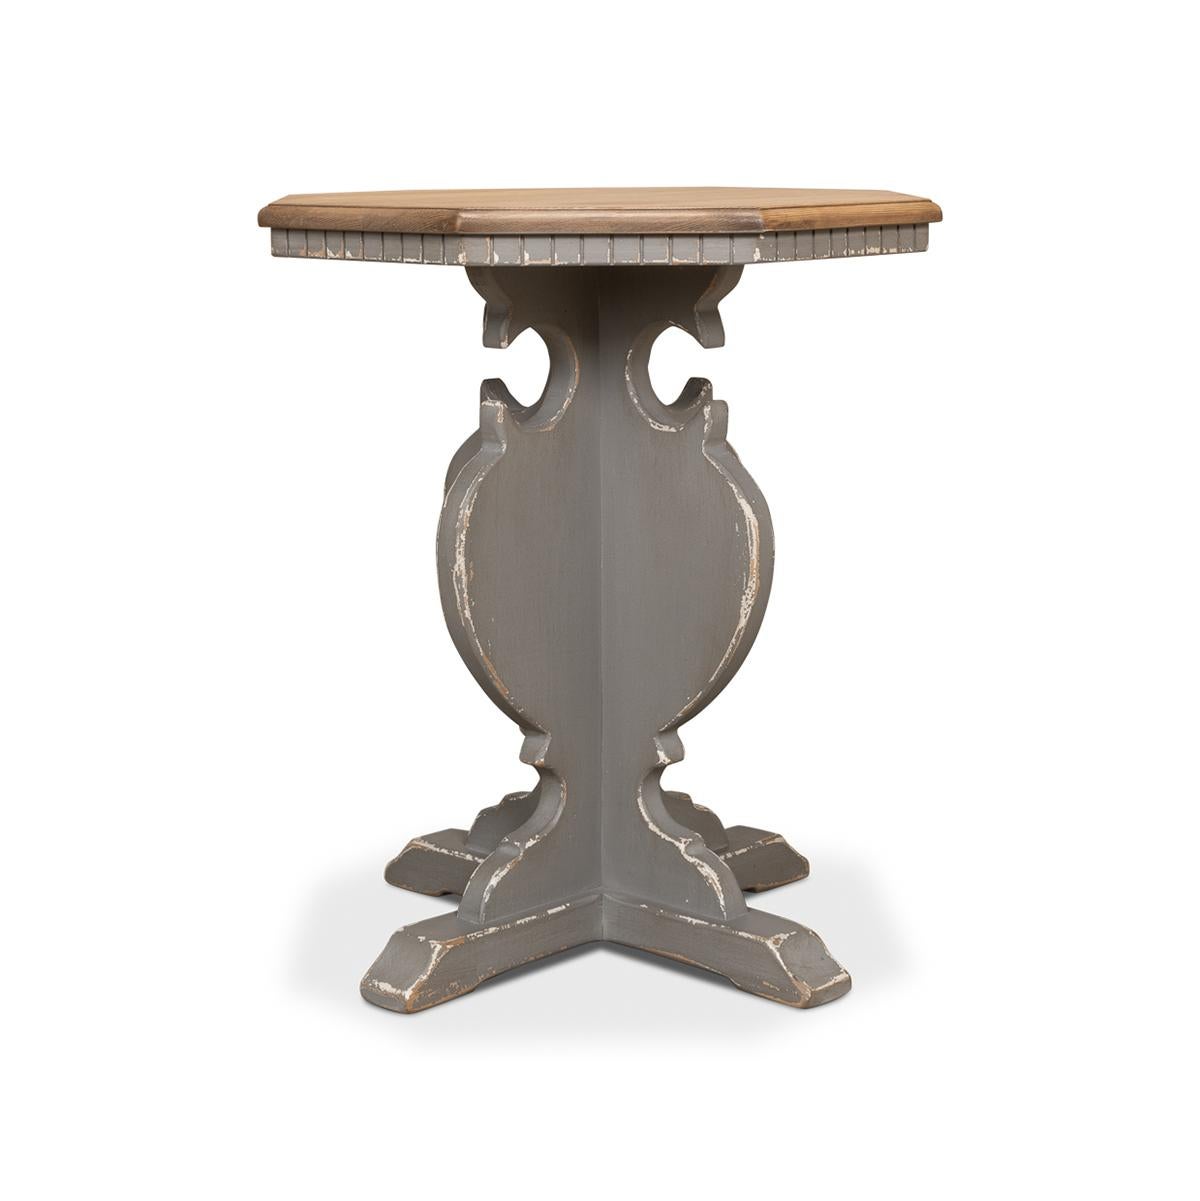 Wood Rustic Provincial Painted End Table For Sale